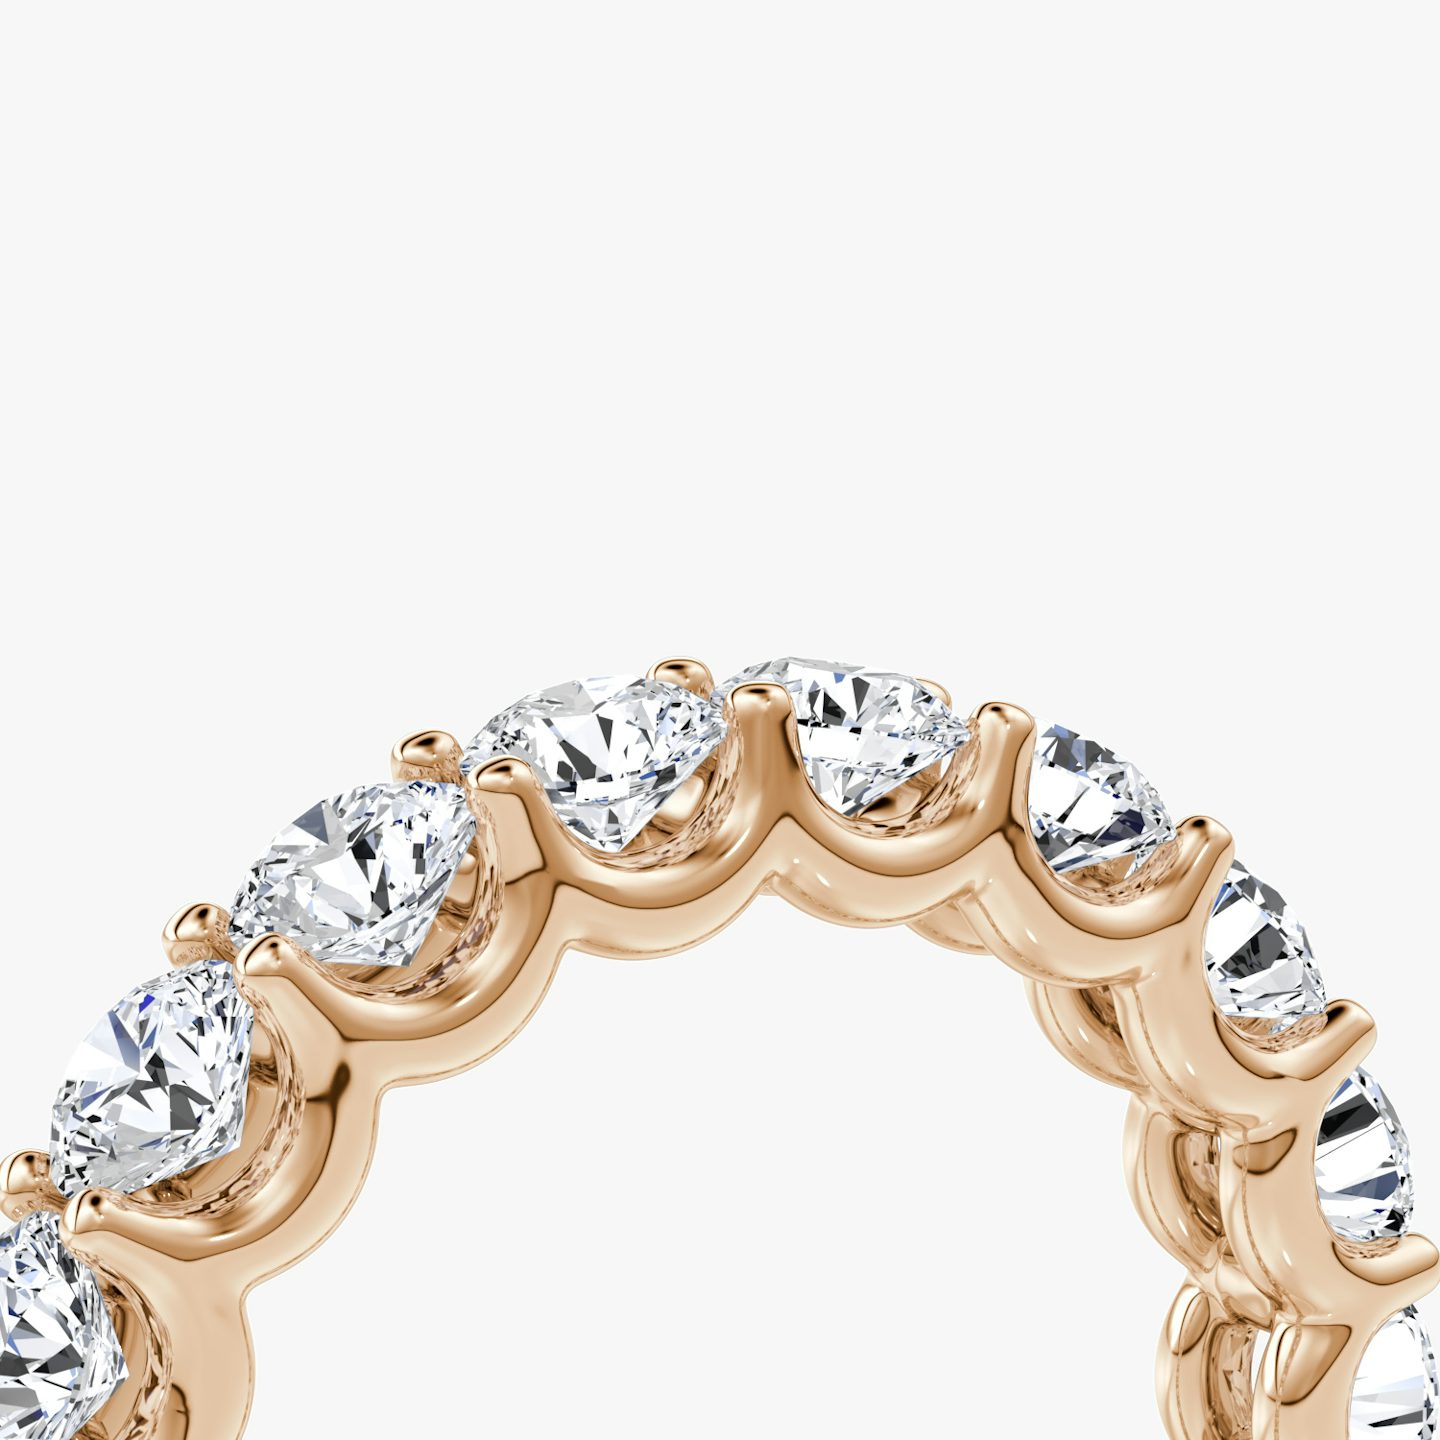 The Eternity Band | Round Brilliant | 14k | 14k Rose Gold | Carat weight: 3